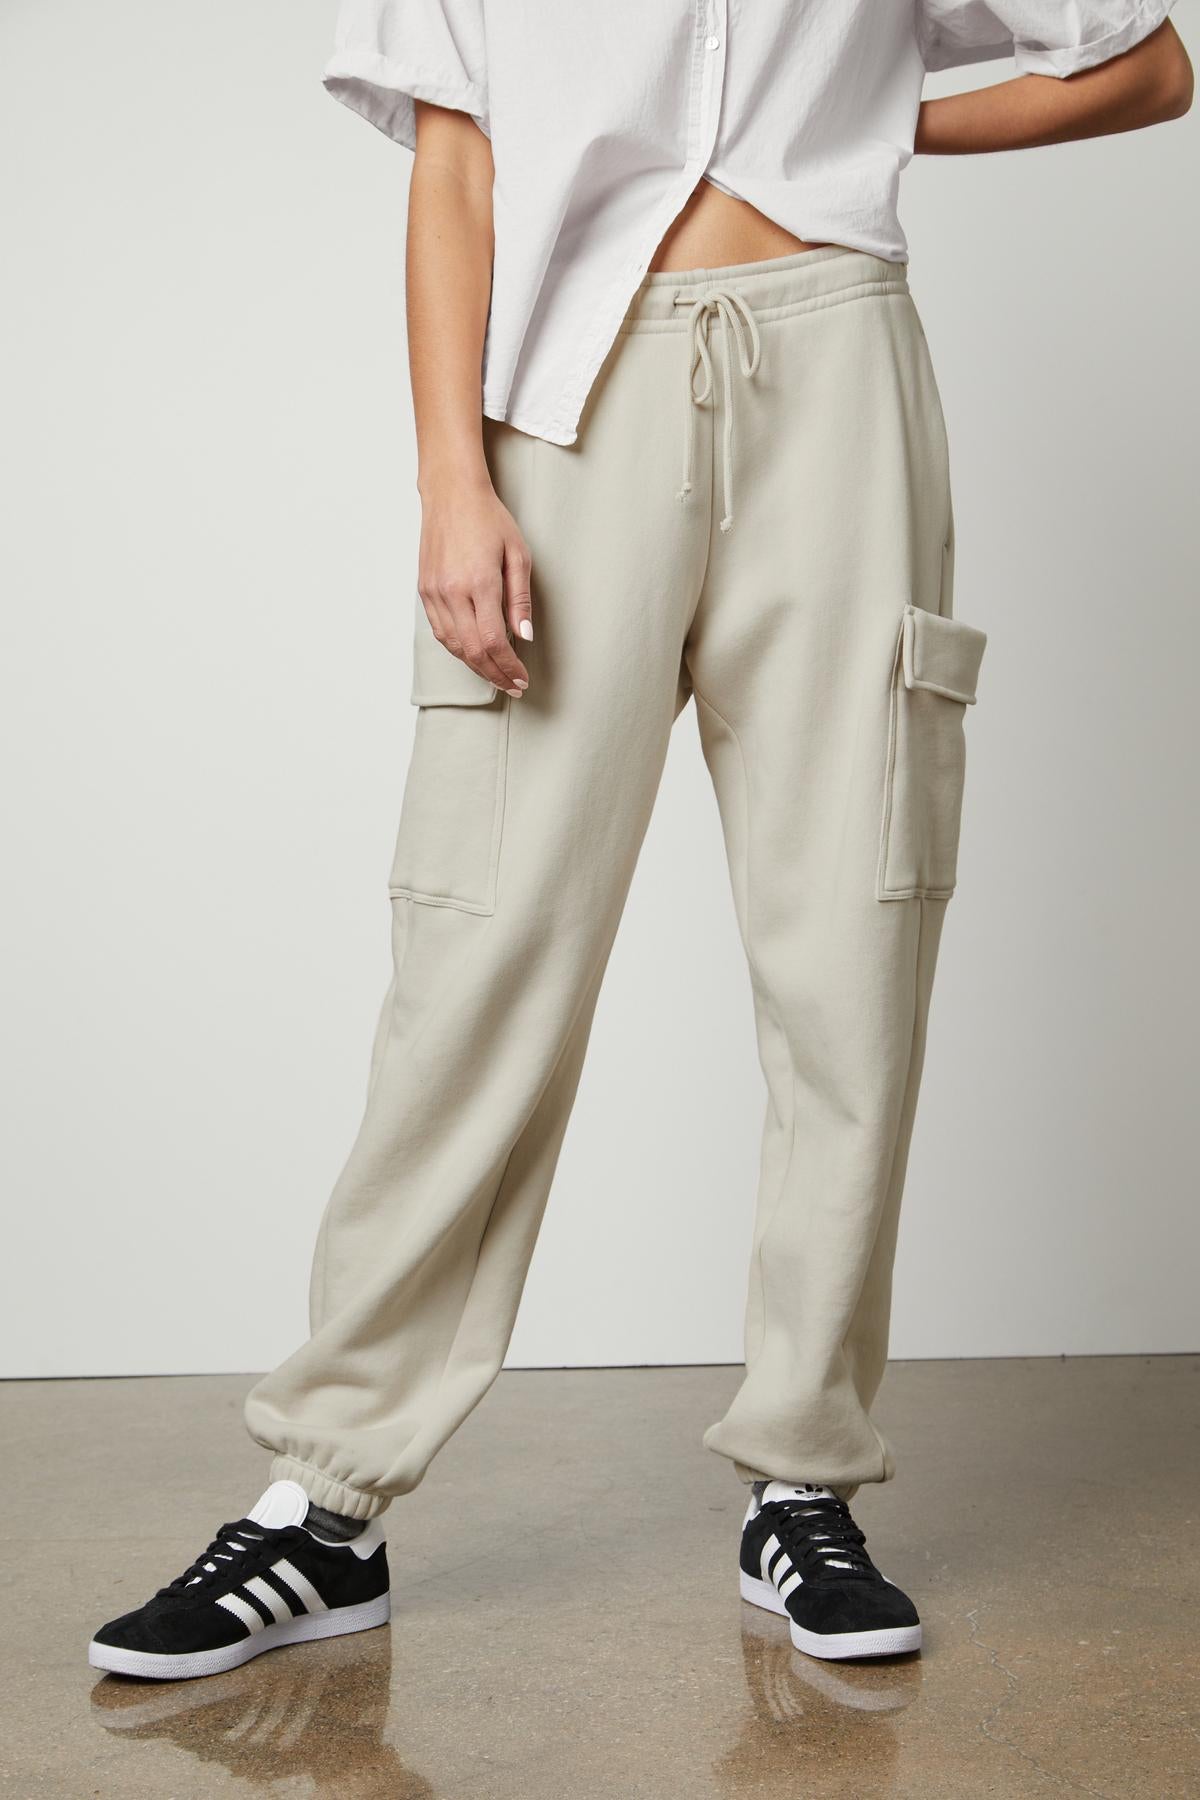 A woman wearing a white t-shirt and Velvet by Graham & Spencer LUMI DRAWSTRING WAIST SWEATPANT for everyday wear while running errands.-35660369395905